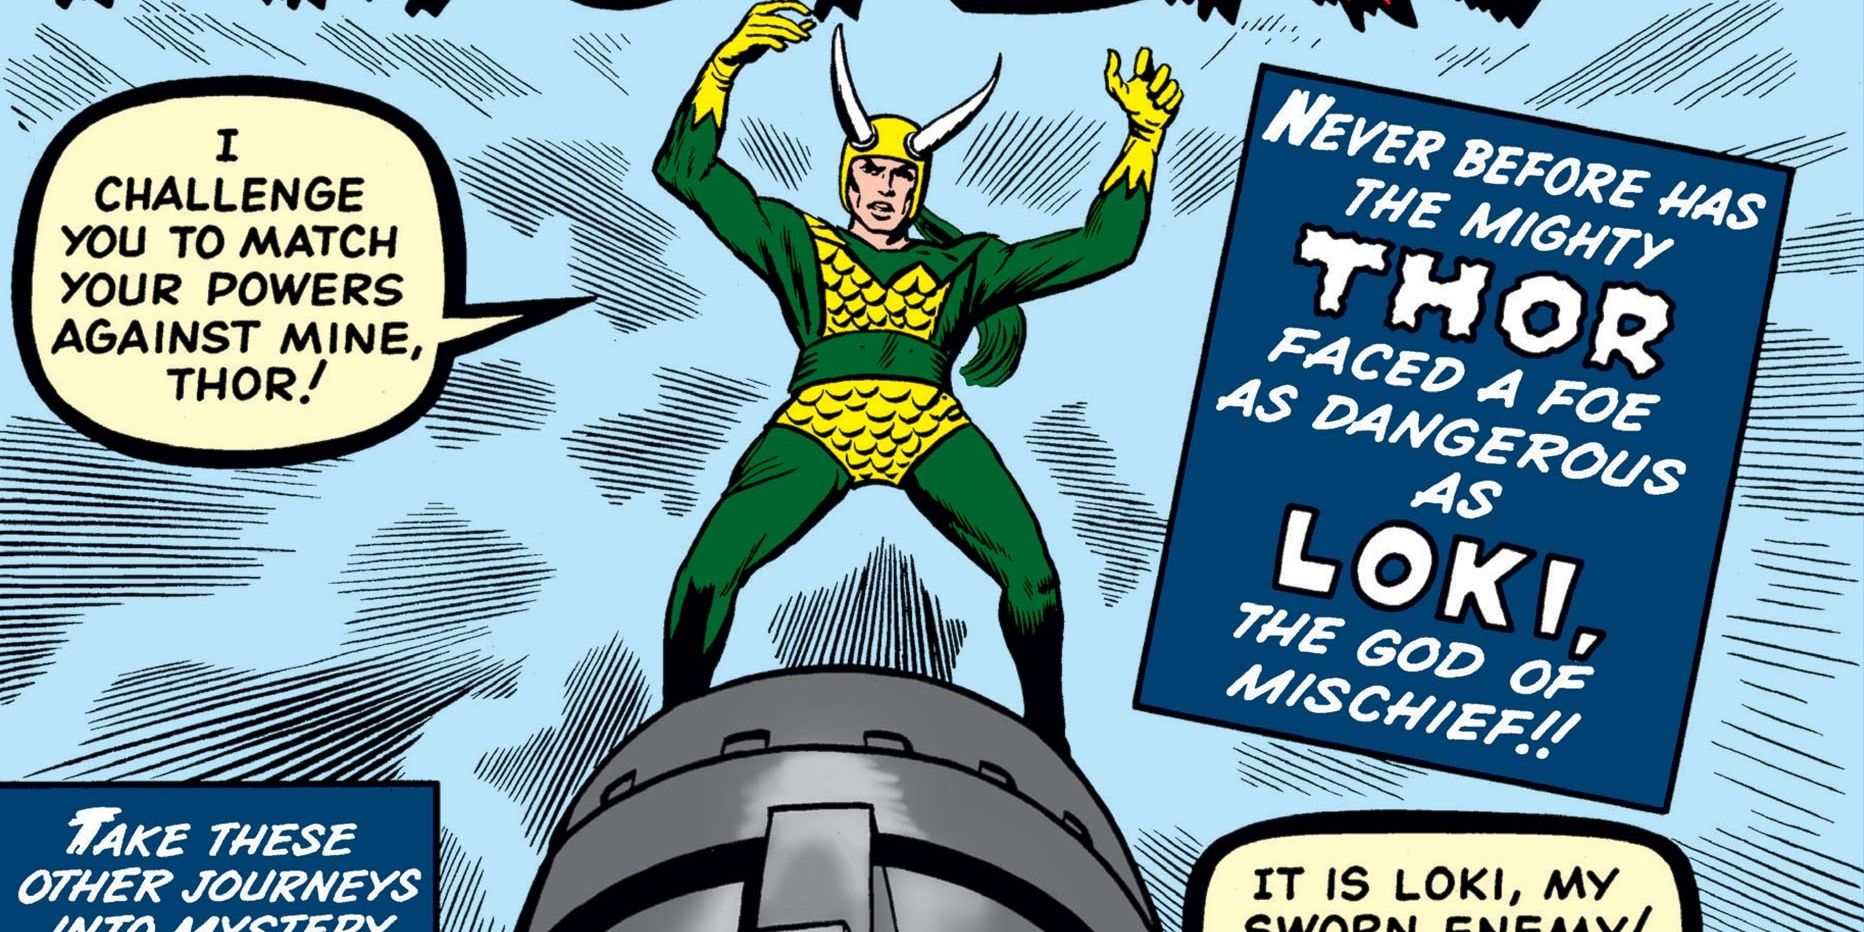 Loki first appearance in Marvel Comics Journey into Mystery 85 in a green-yellow outfit with horns